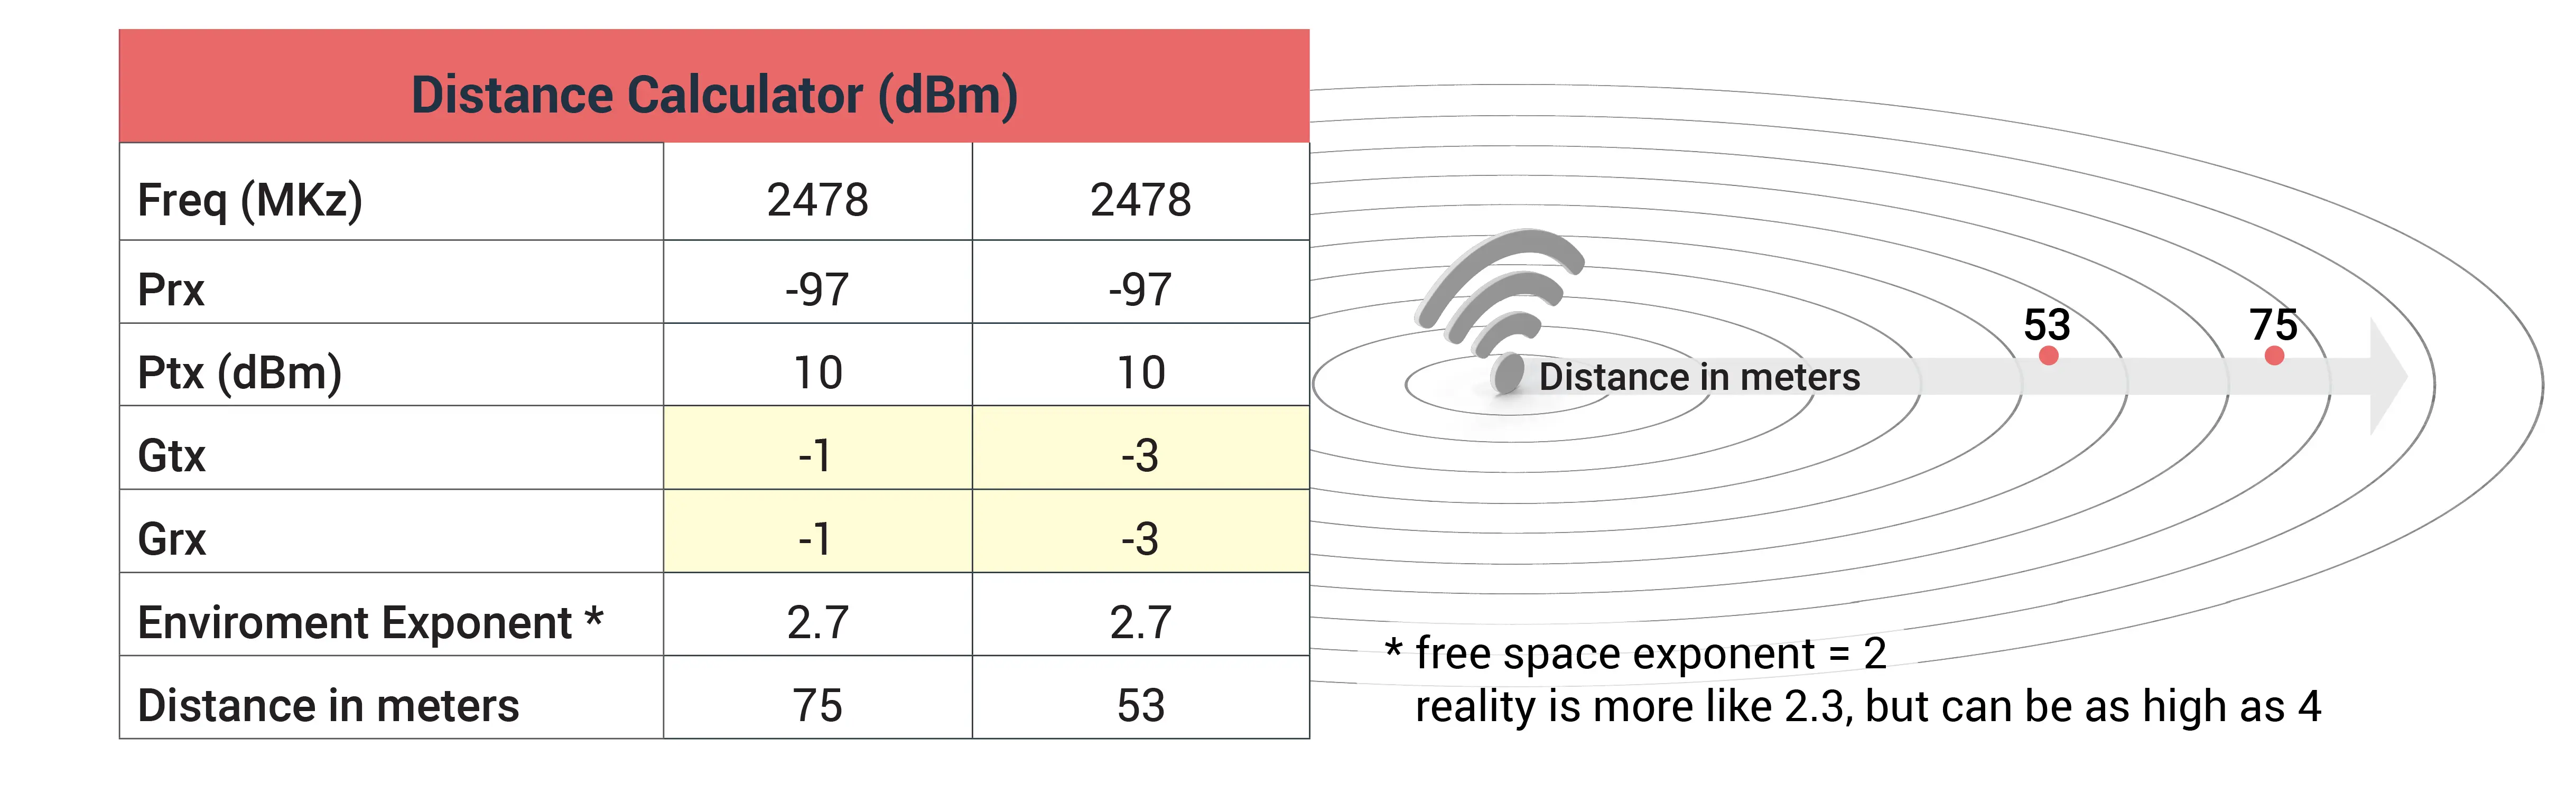 Antenna distance comparison table 1 when environment exponent is 2.7